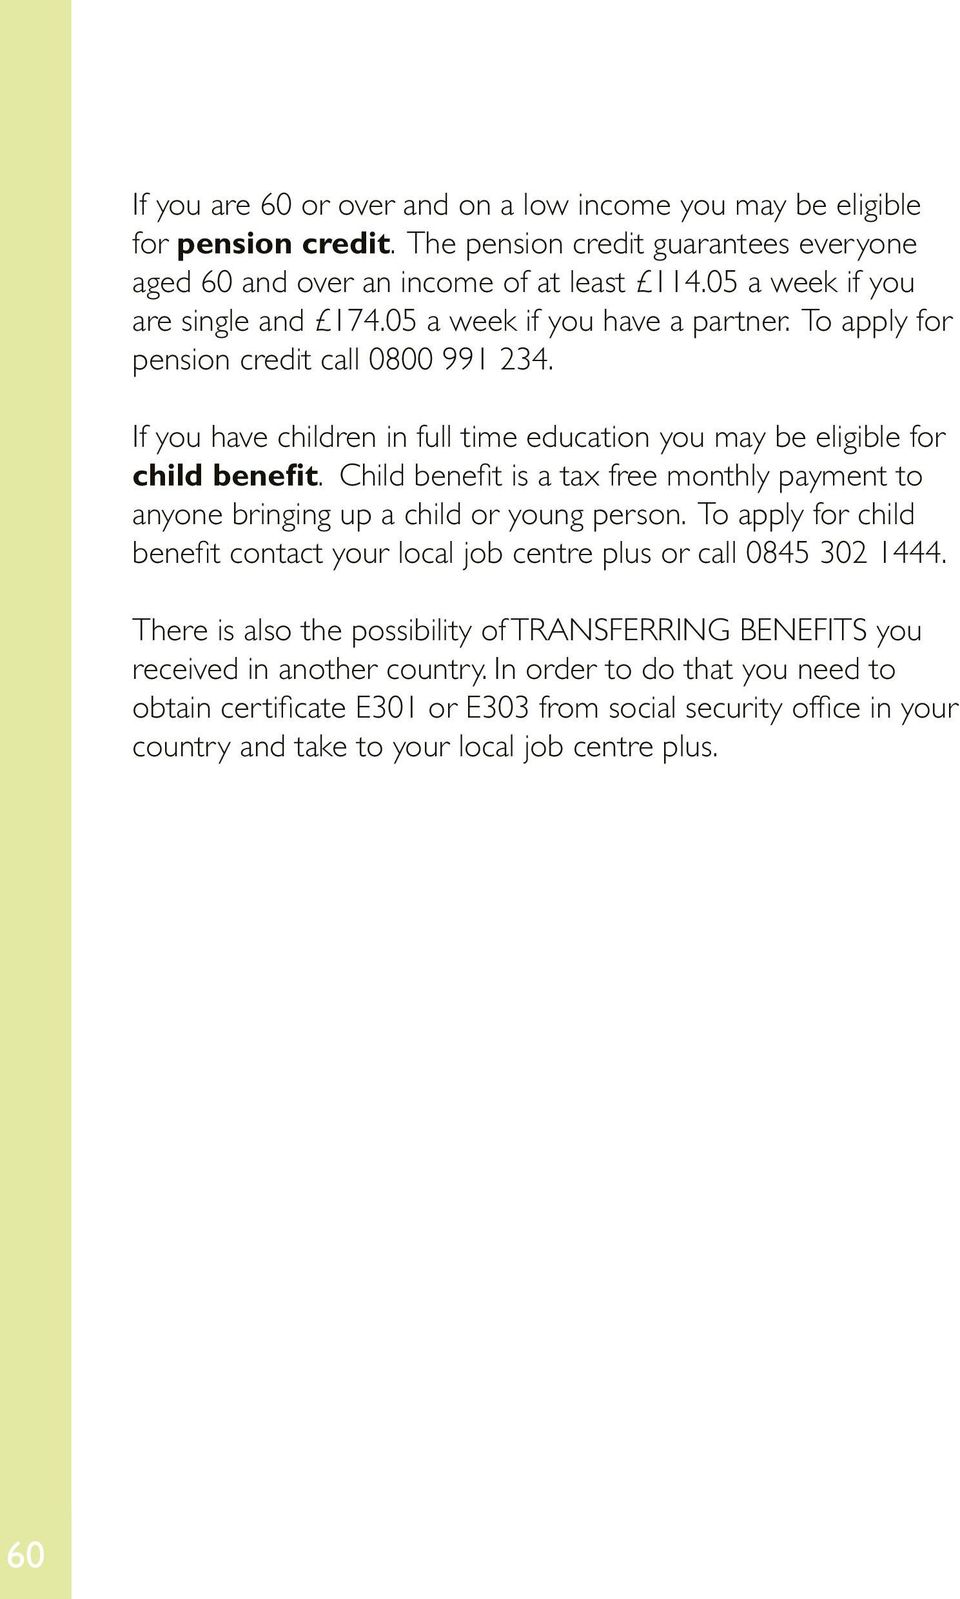 If you have children in full time education you may be eligible for child benefit. Child benefit is a tax free monthly payment to anyone bringing up a child or young person.